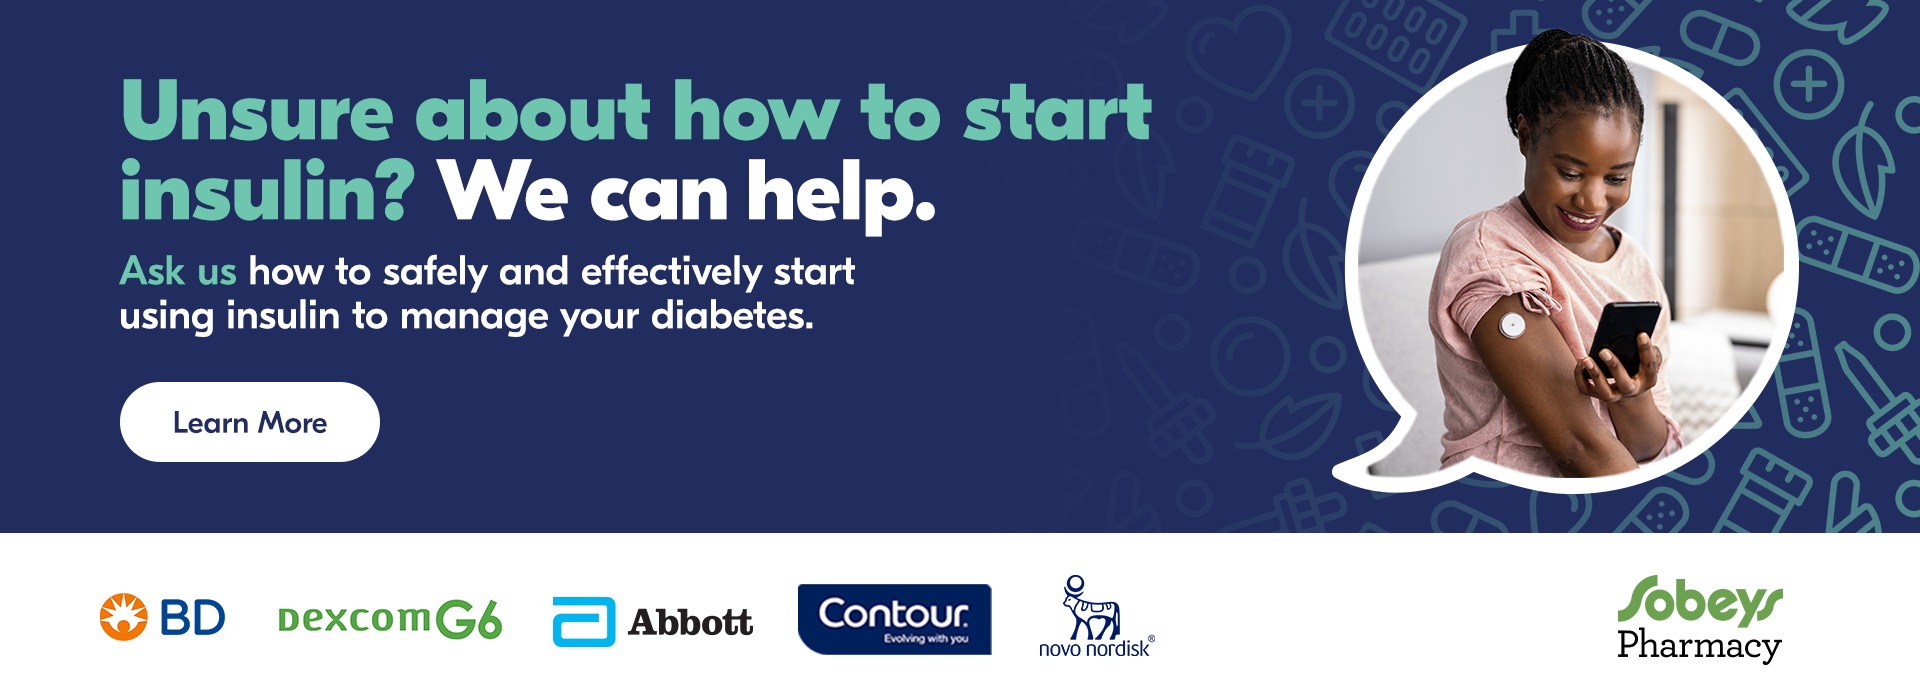 Text Reading 'Unsure about how to start insulin? We are here to help. Ask us how to safely and effectively start using insulin to manage your diabetes. 'Learn more' from the button given below for more information.'